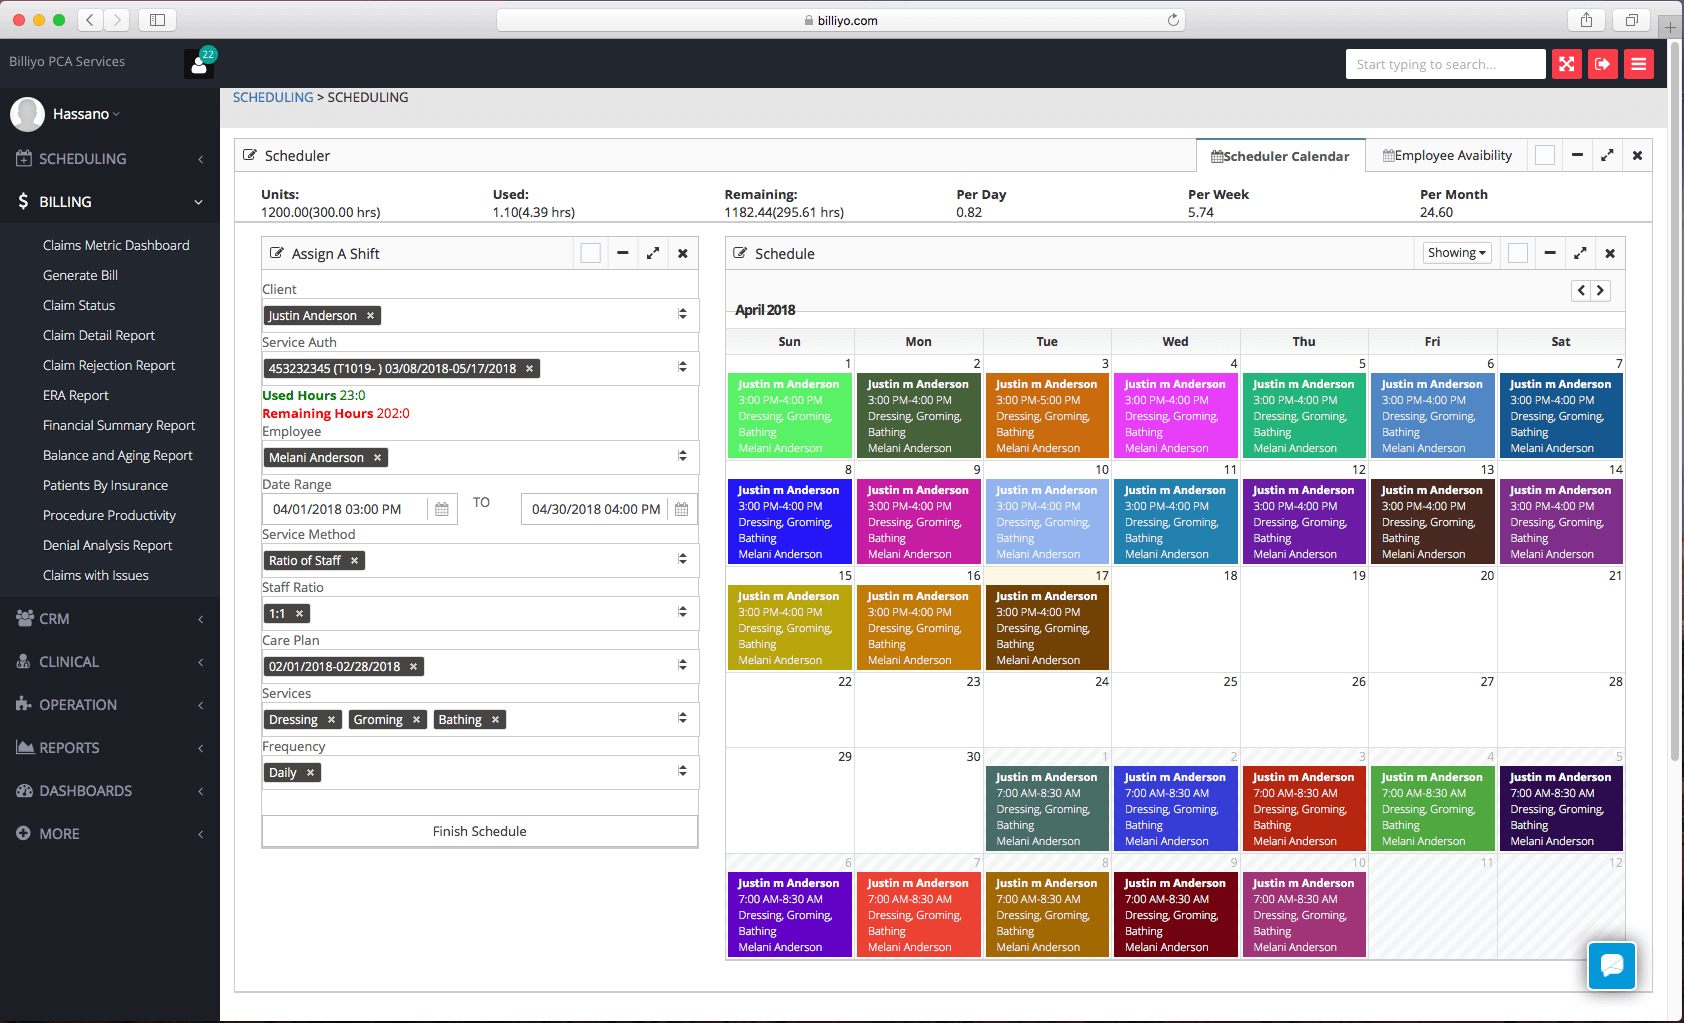 Billiyo Scheduling page for Home Care